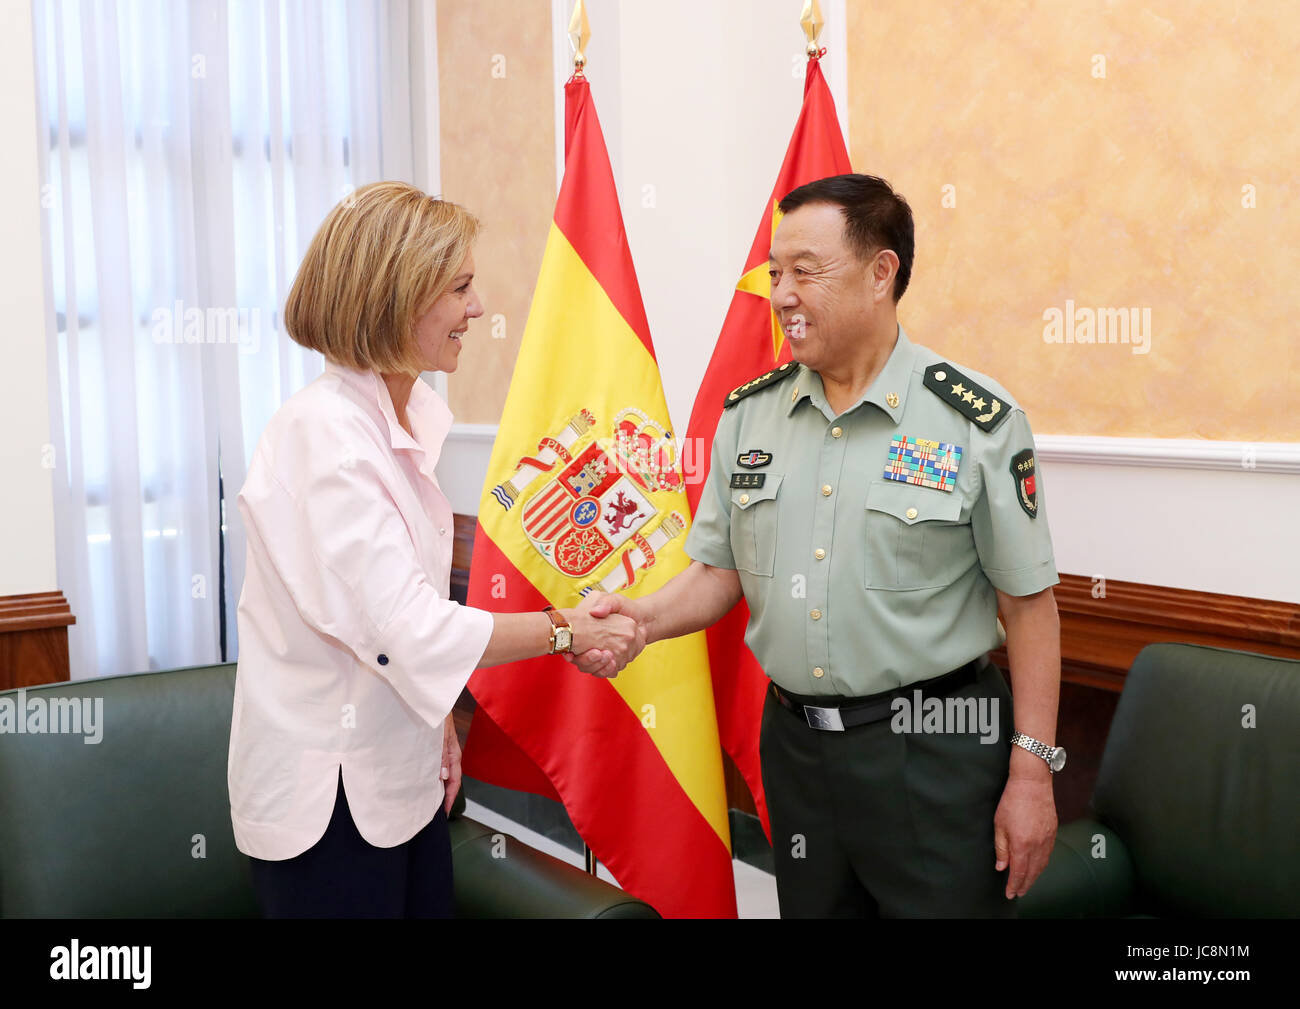 (170614) -- MADRID, June 14, 2017 (Xinhua) -- Fan Changlong (R), vice chairman of China's Central Military Commission, meets with Spain's Minister of Defense Maria Dolores de Cospedal in Madrid, Spain, June 13, 2017. (Xinhua/Li Xiaowei) (zw) Stock Photo